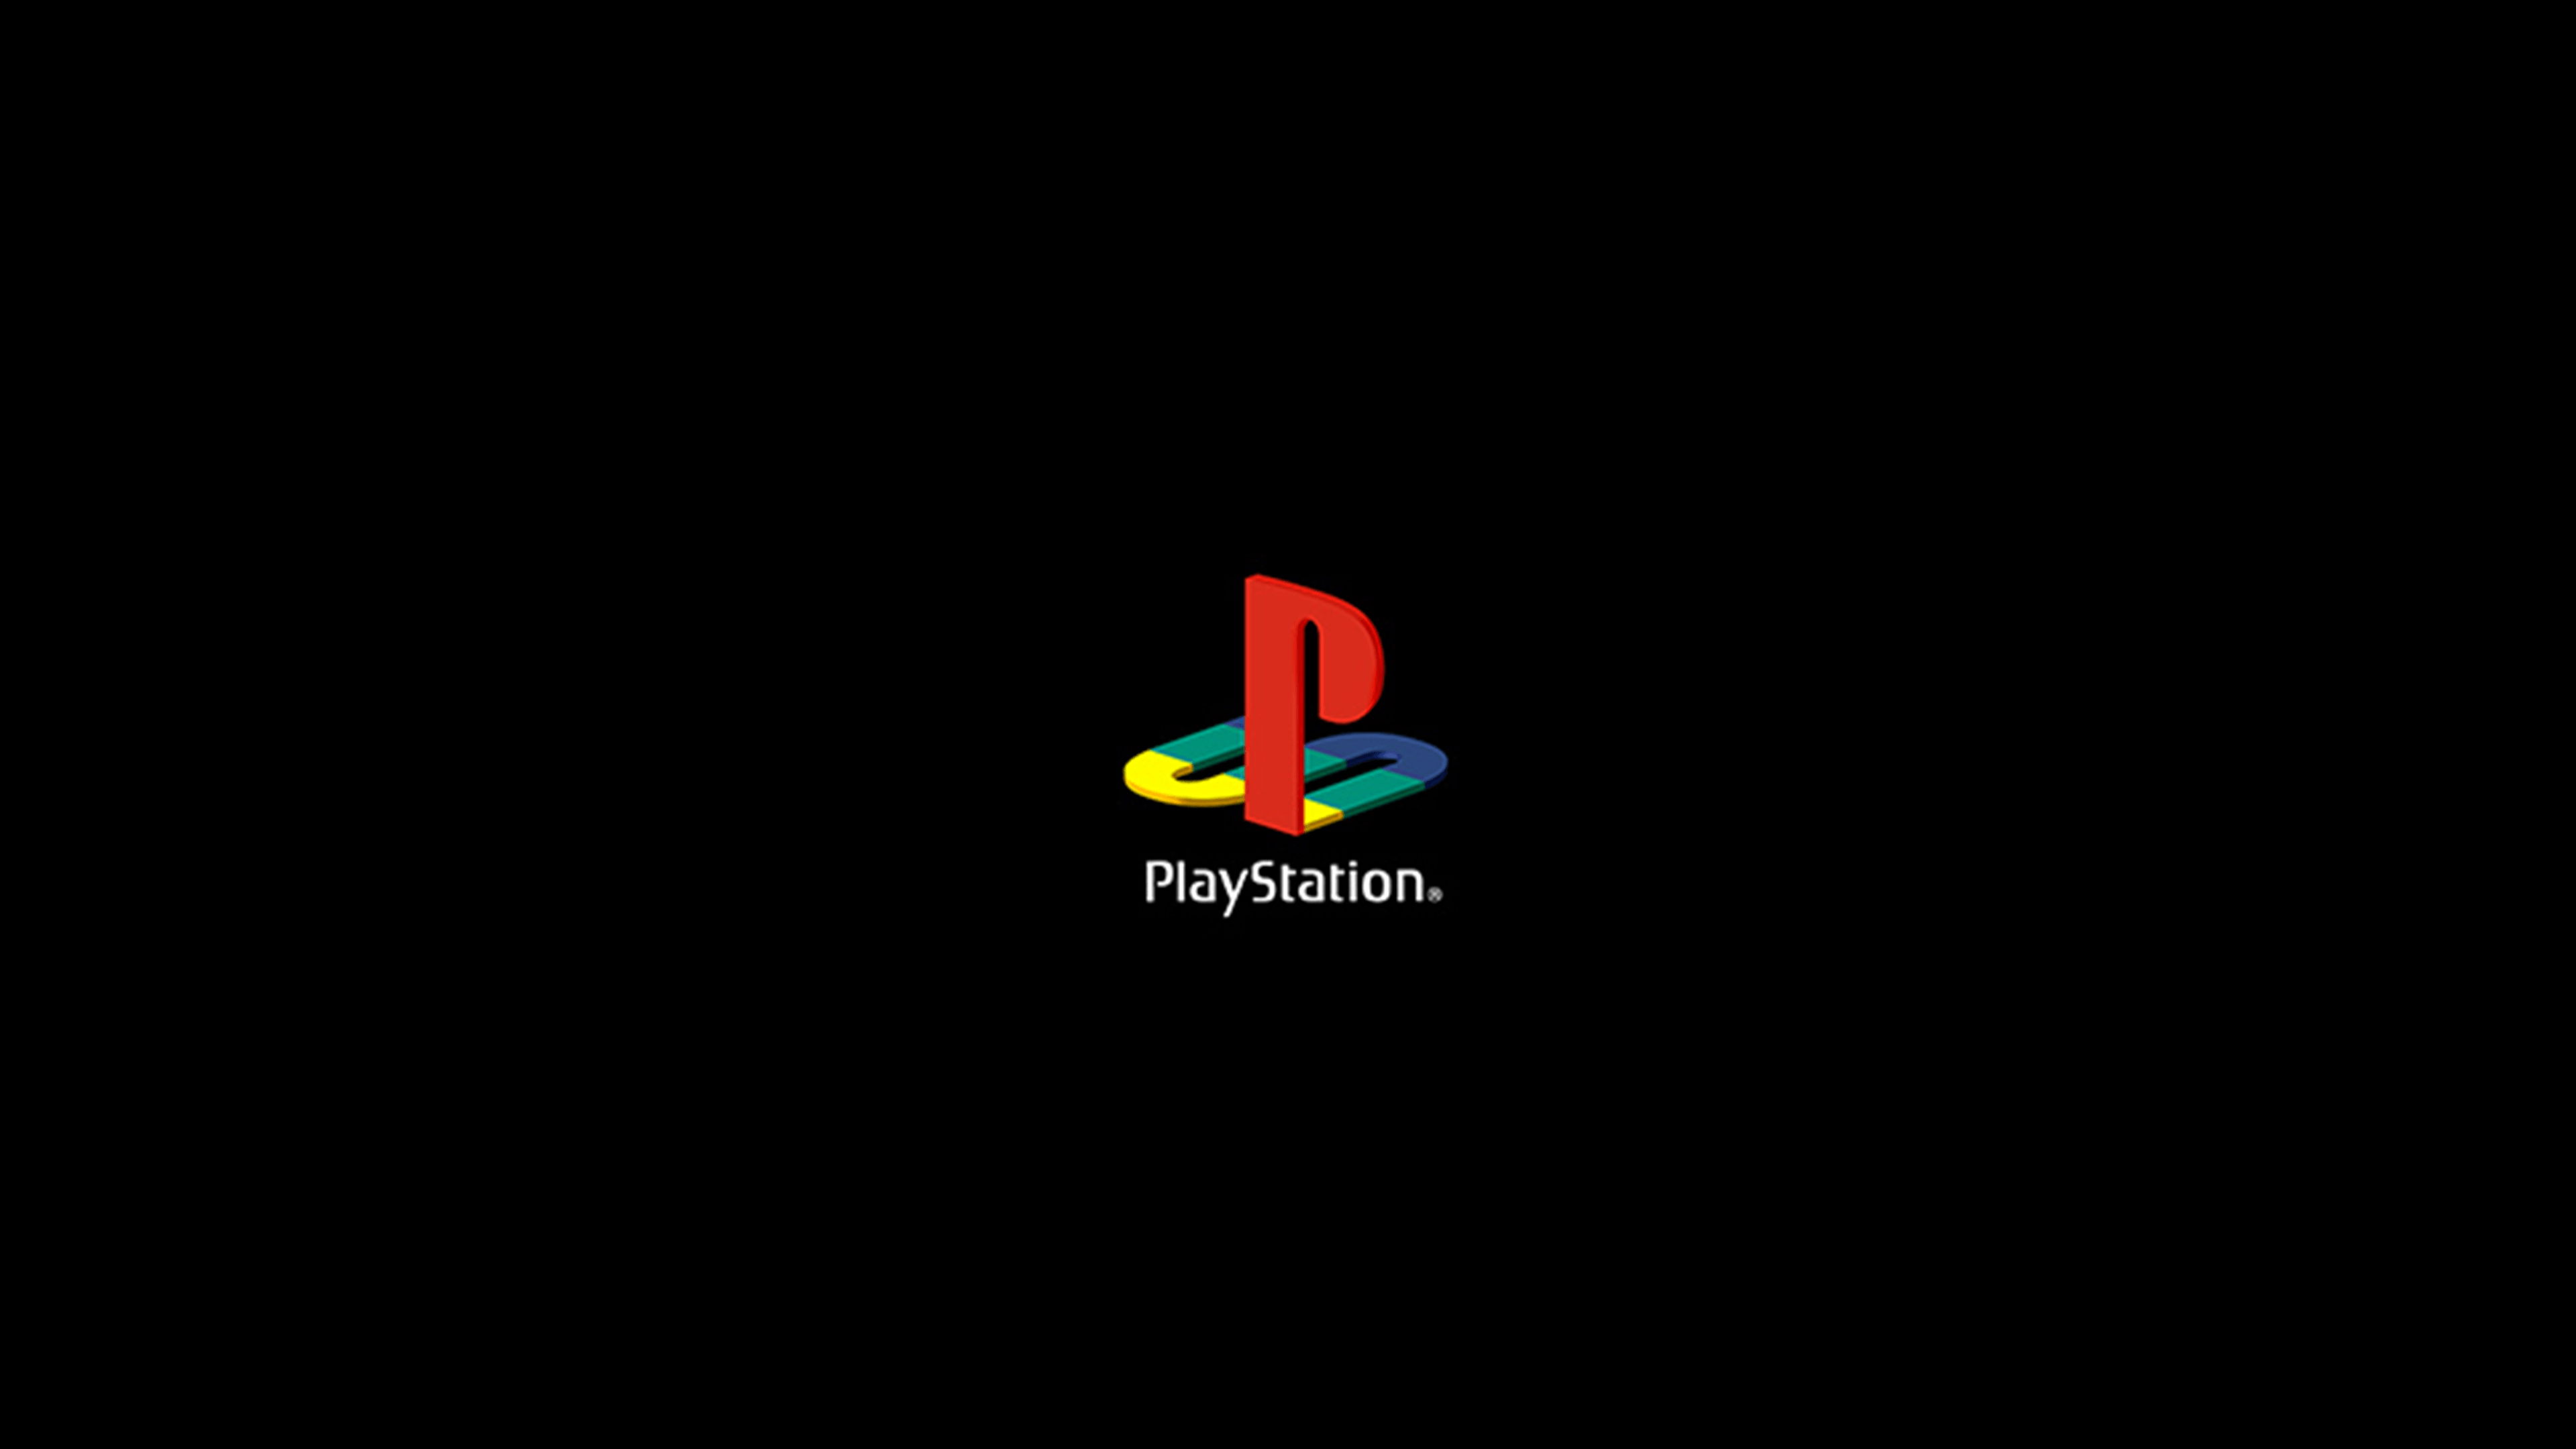 PS4 And PS4 Pro High Resolution Wallpaper 1080p 4K